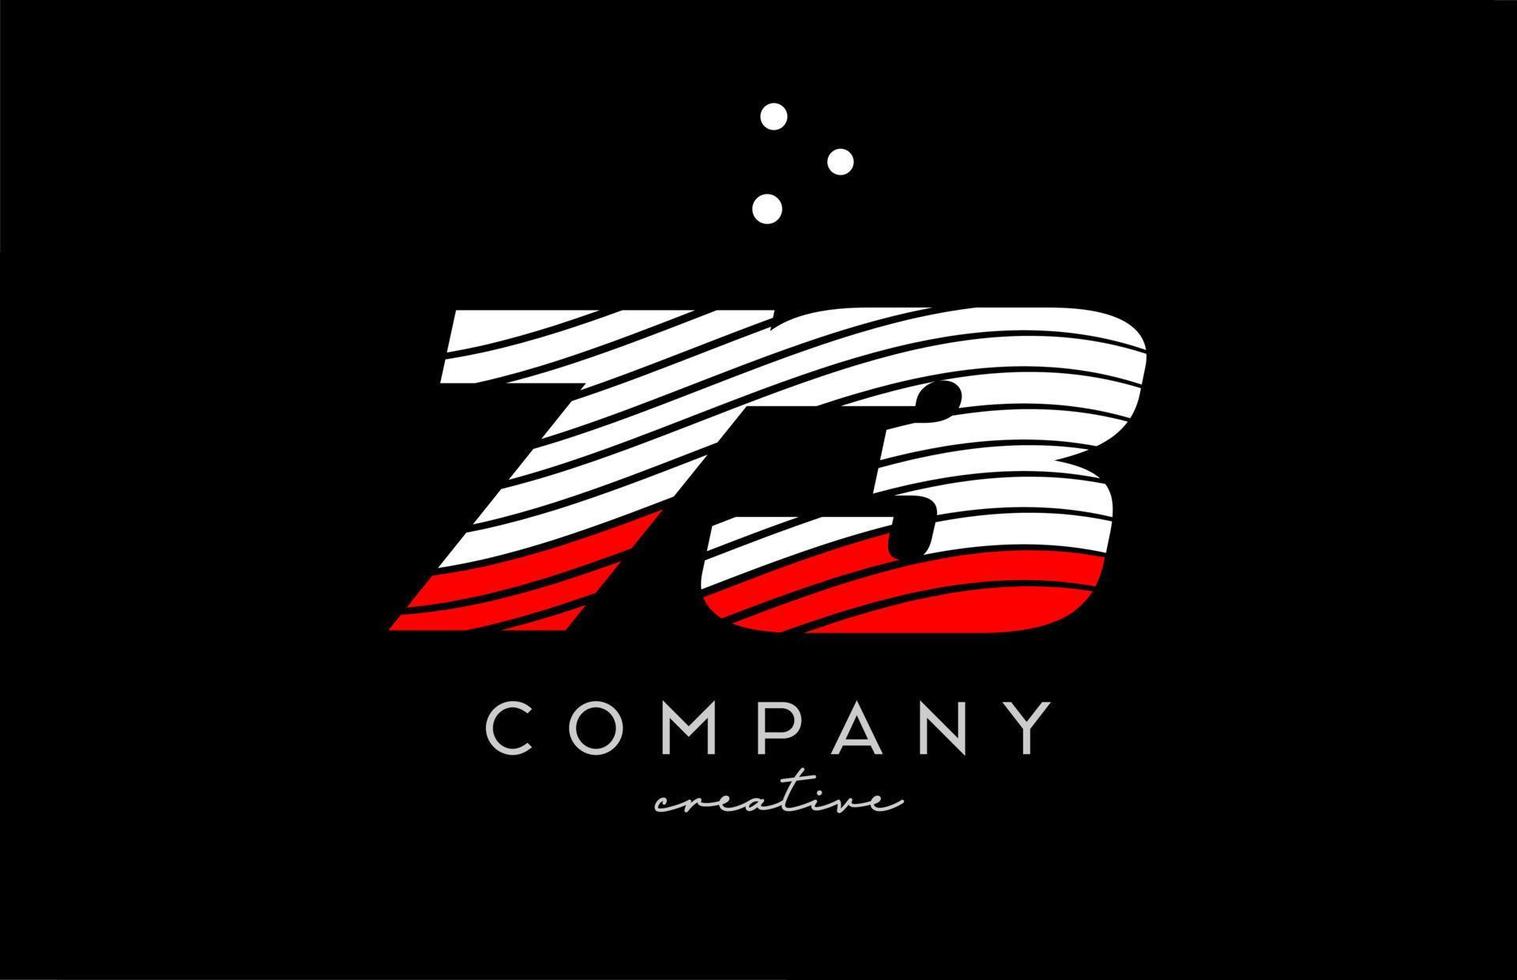 73 number logo with red white lines and dots. Corporate creative template design for business and company vector